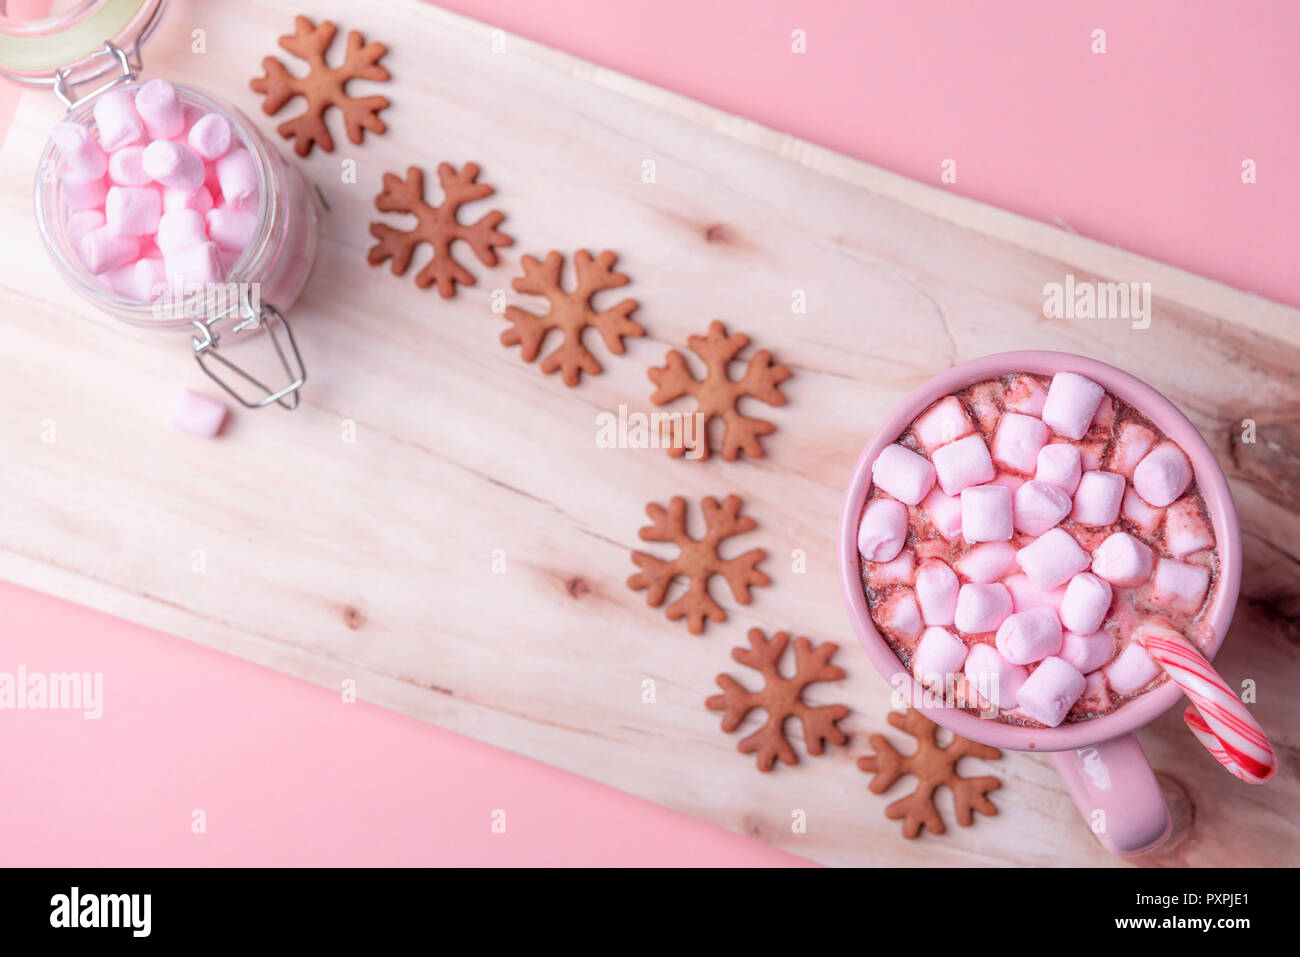 American winter sweets, a cup of hot chocolate with mini marshmallows, a candy cane and gingerbread cookies in snowflakes shape, on a wooden platter. Stock Photo